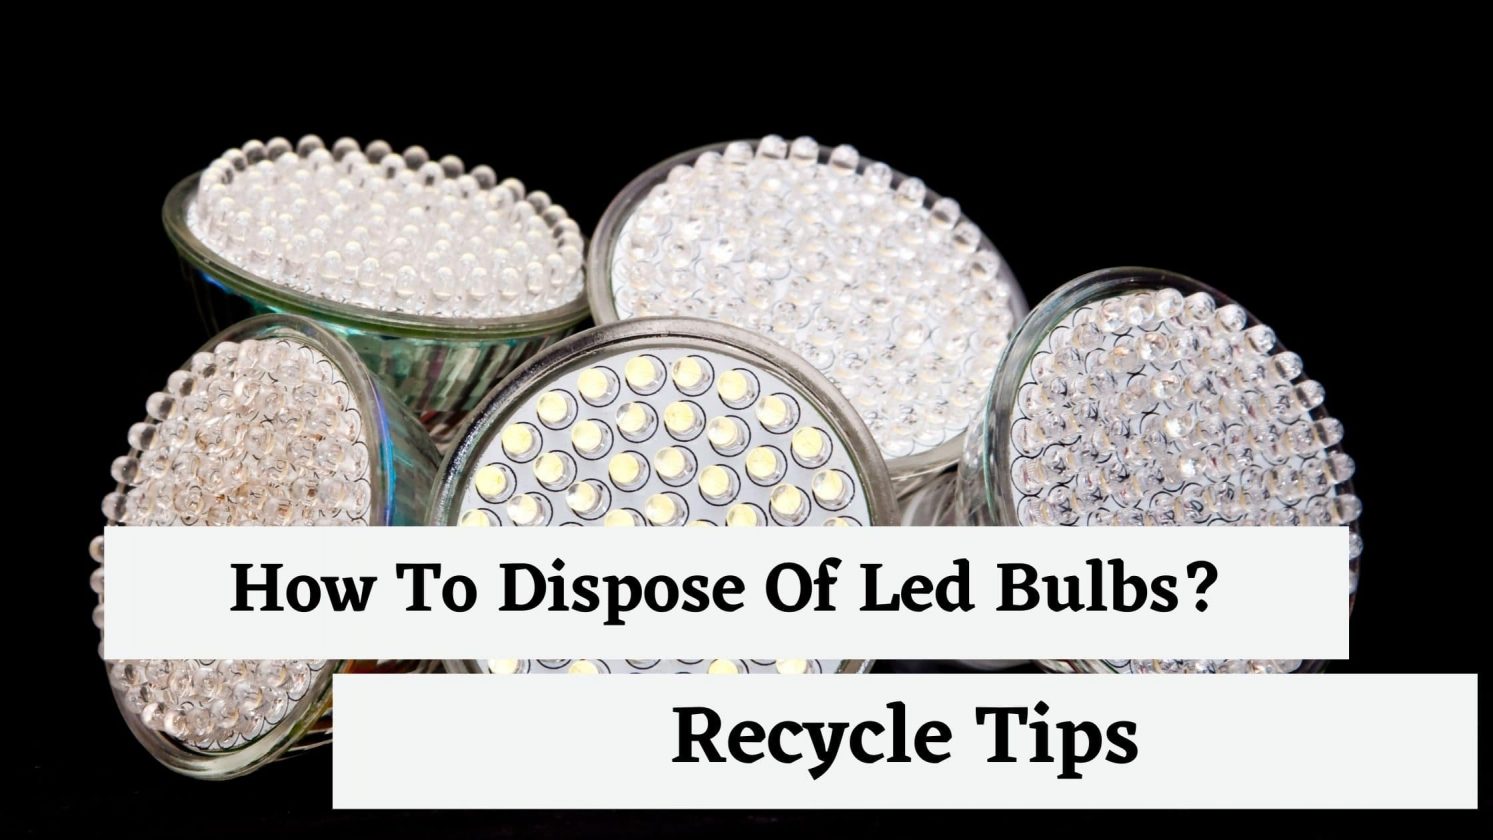 How To Dispose Of Led Bulbs